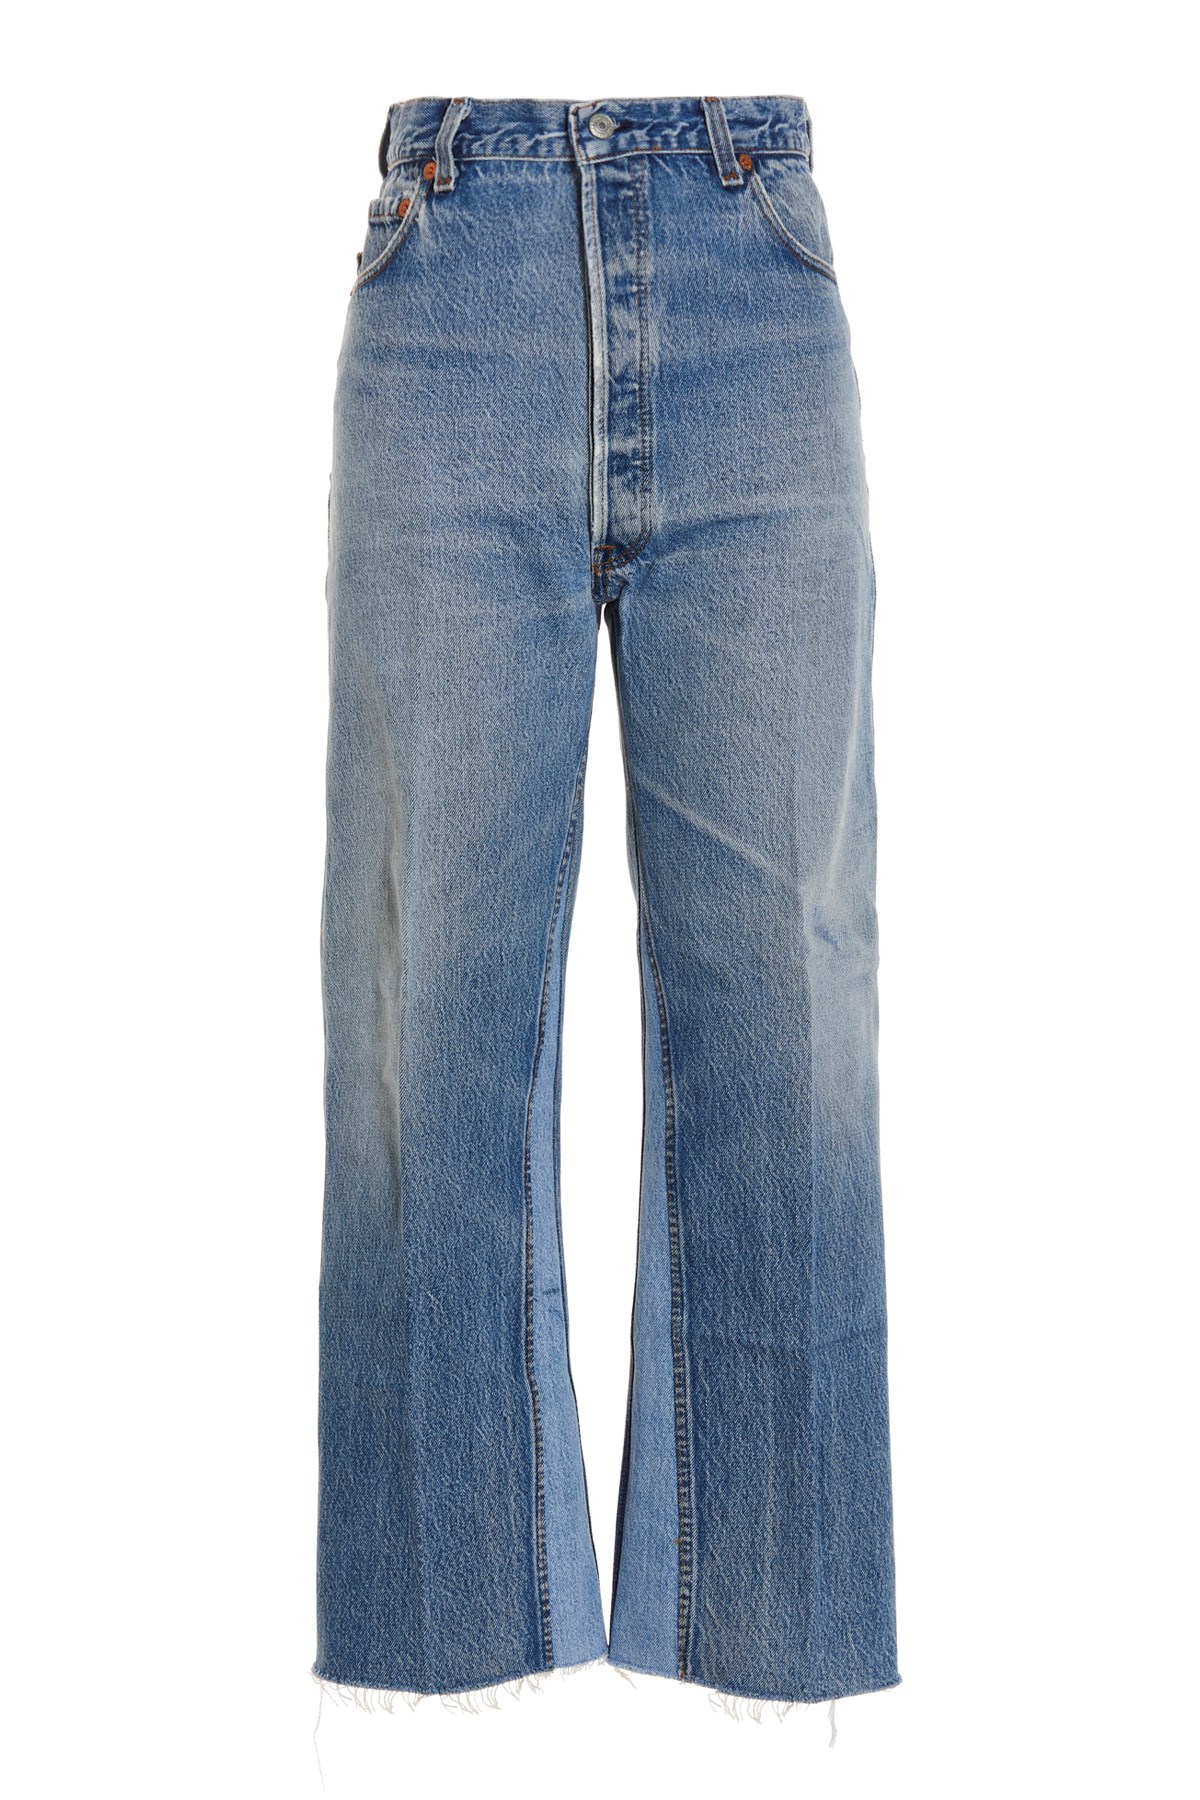 RE/DONE High Waist Cropped Jeans